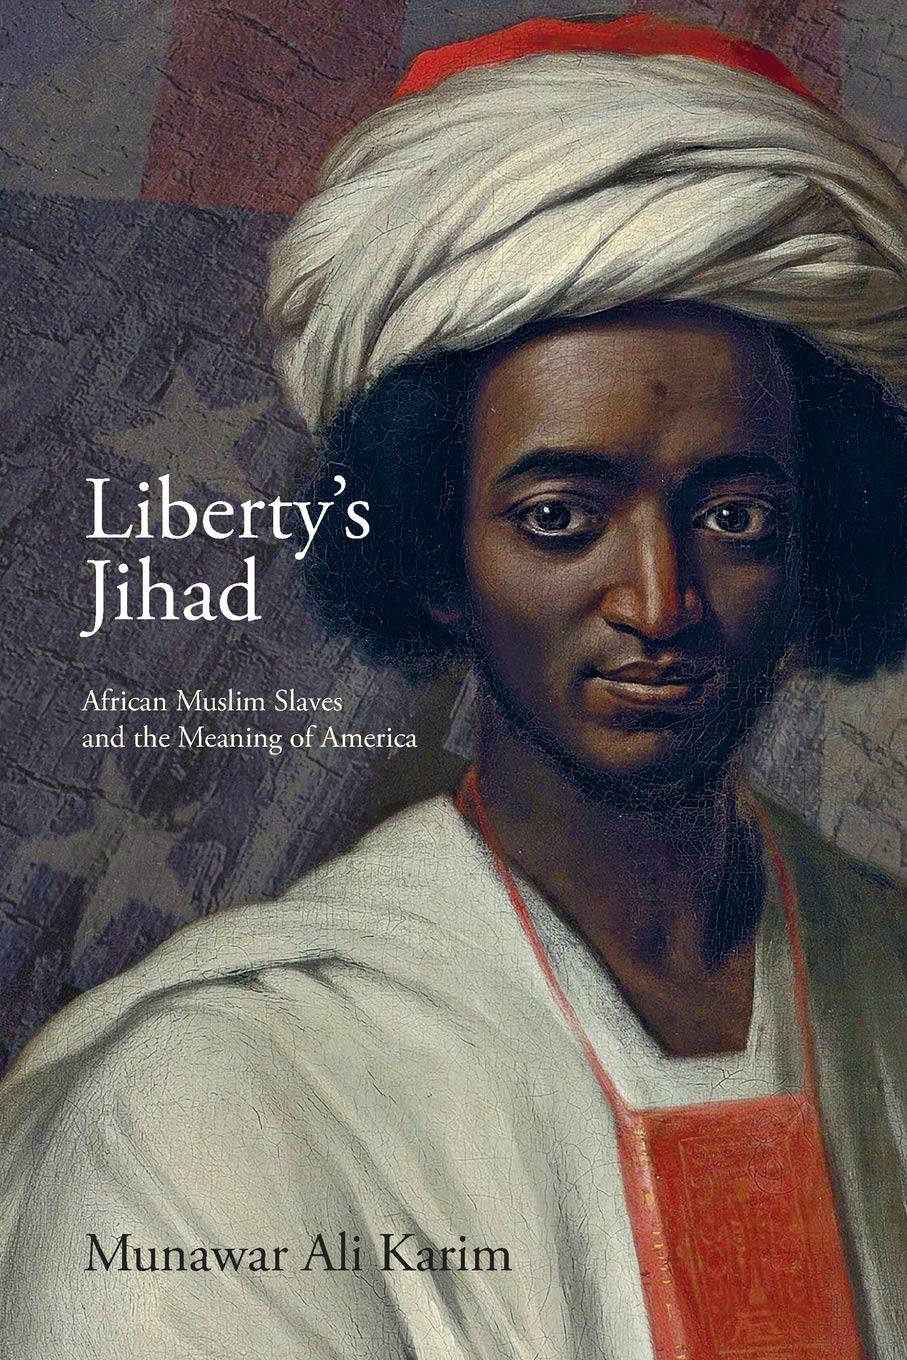 Liberty's Jihad: African Muslim Slaves and the Meaning of America